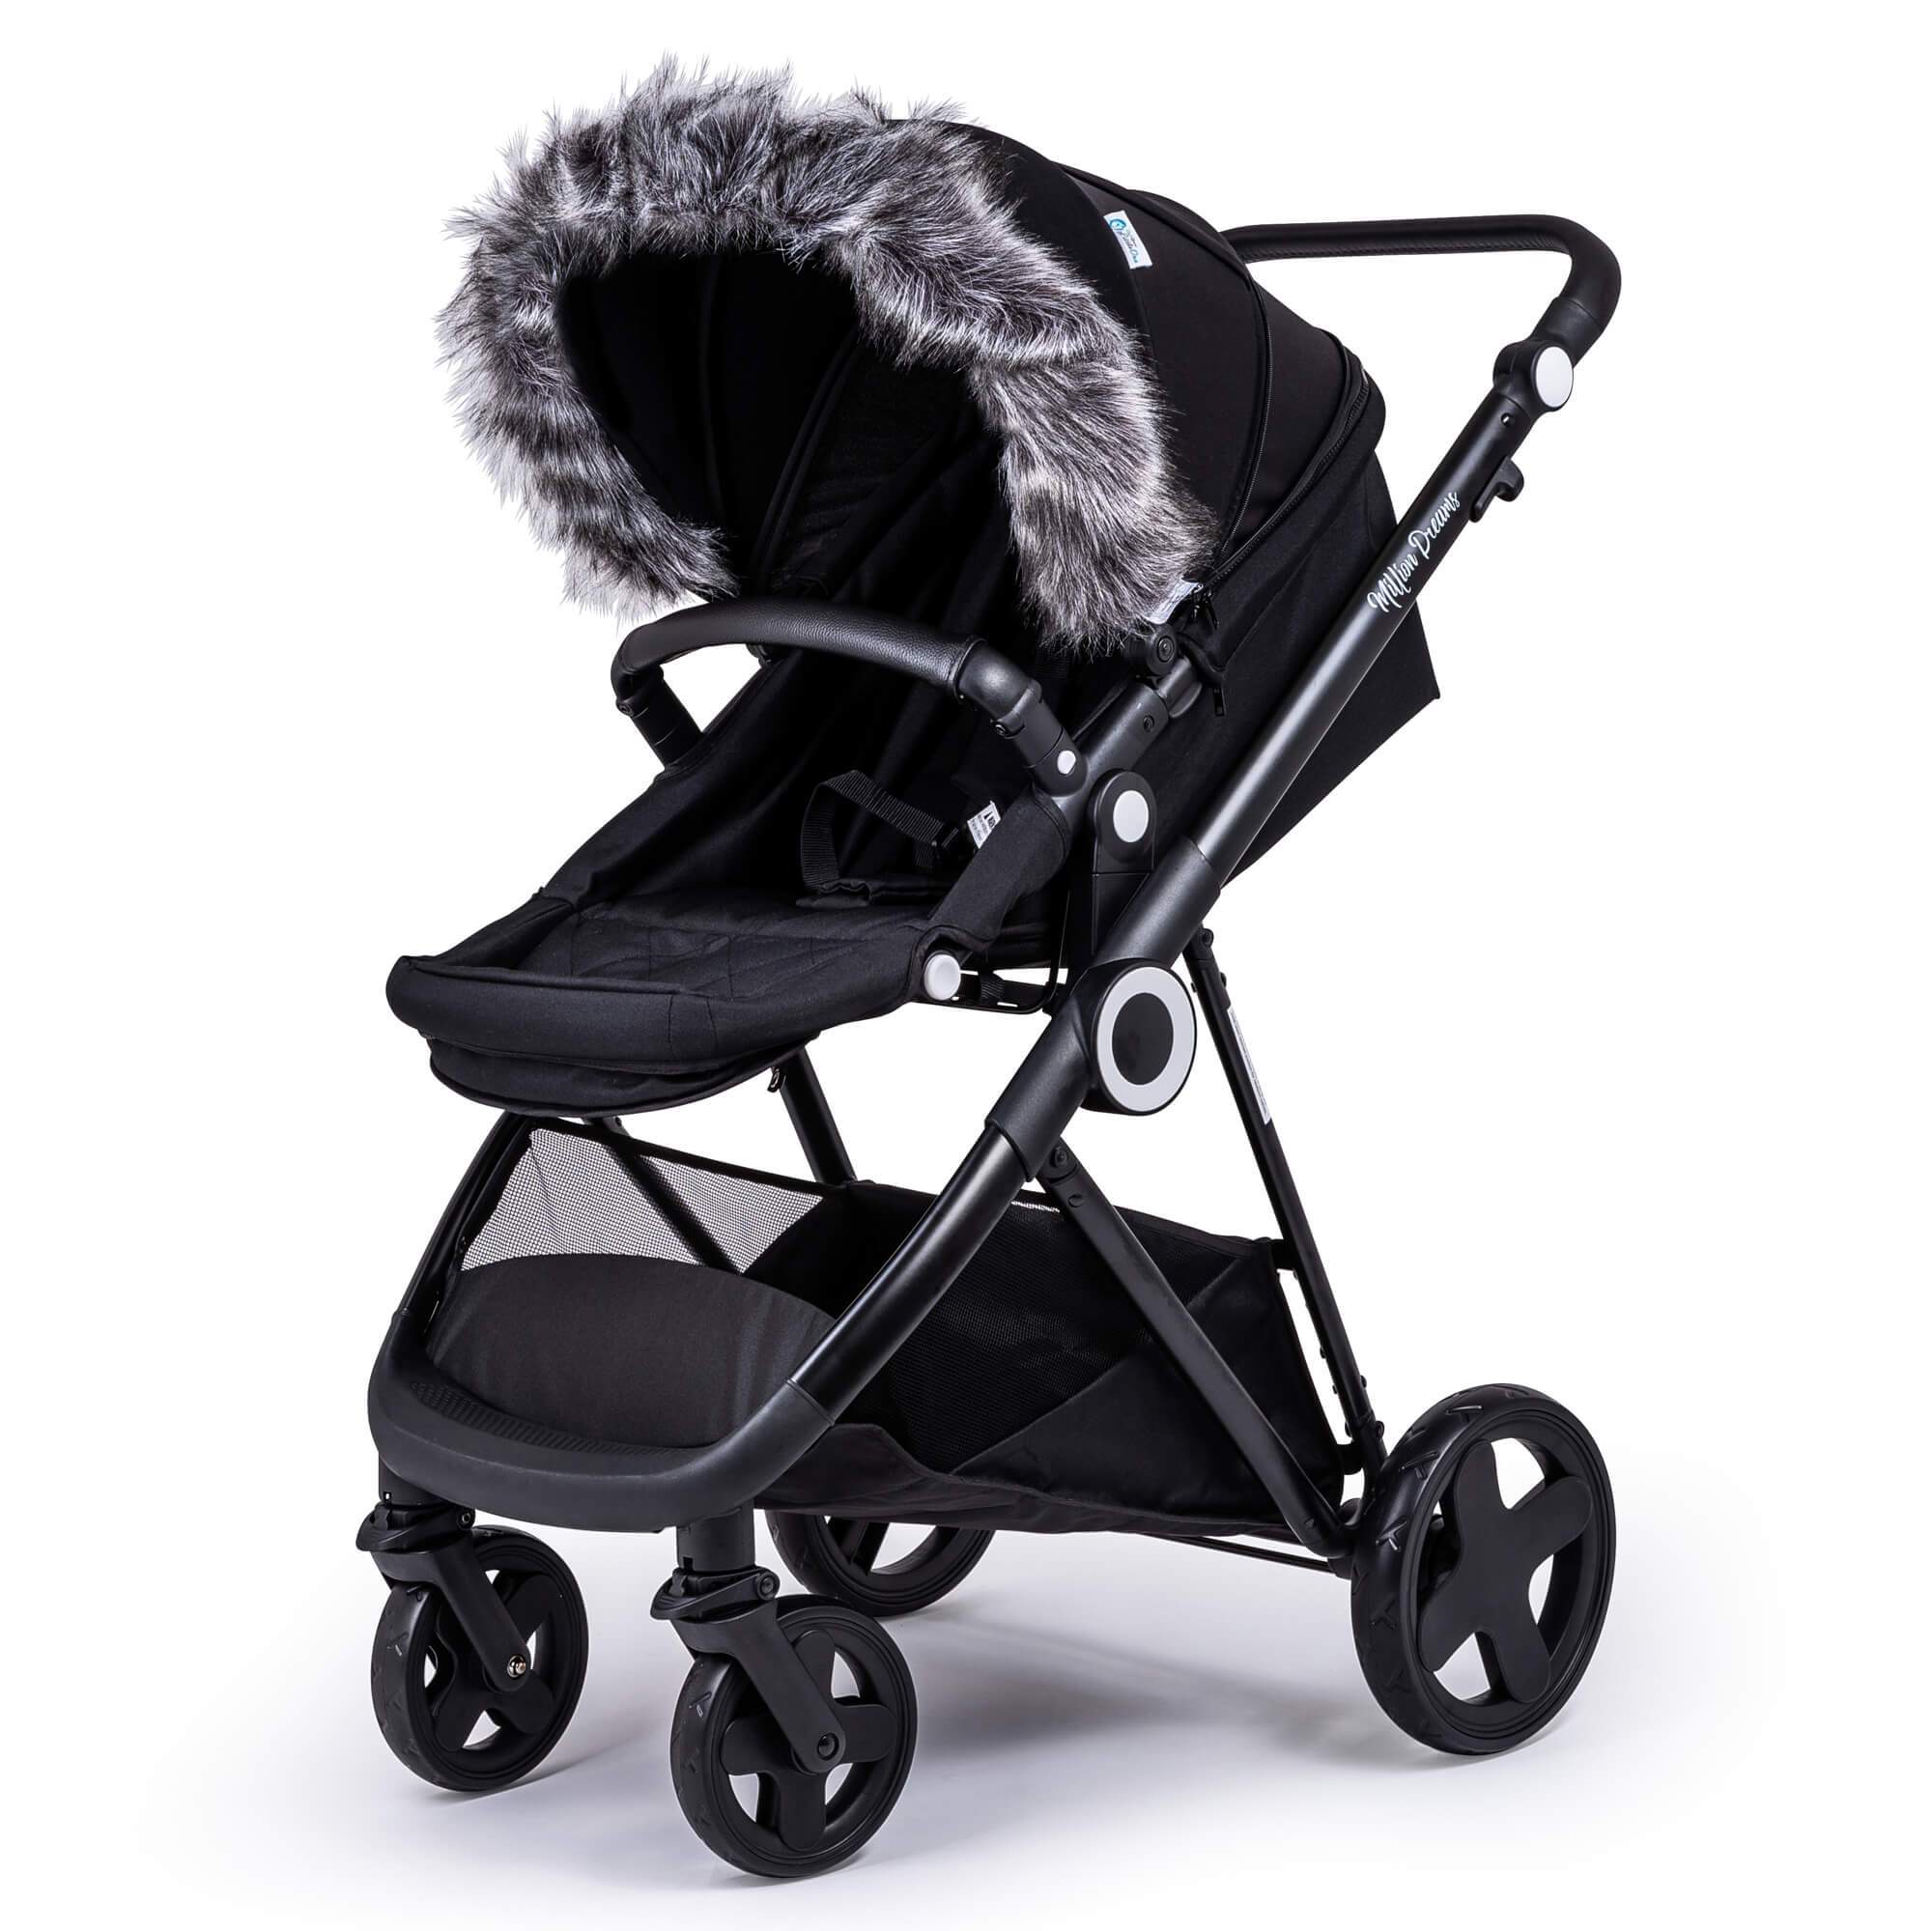 Pram Fur Hood Trim Attachment for Pushchair Compatible with Nania - Dark Grey / Fits All Models | For Your Little One